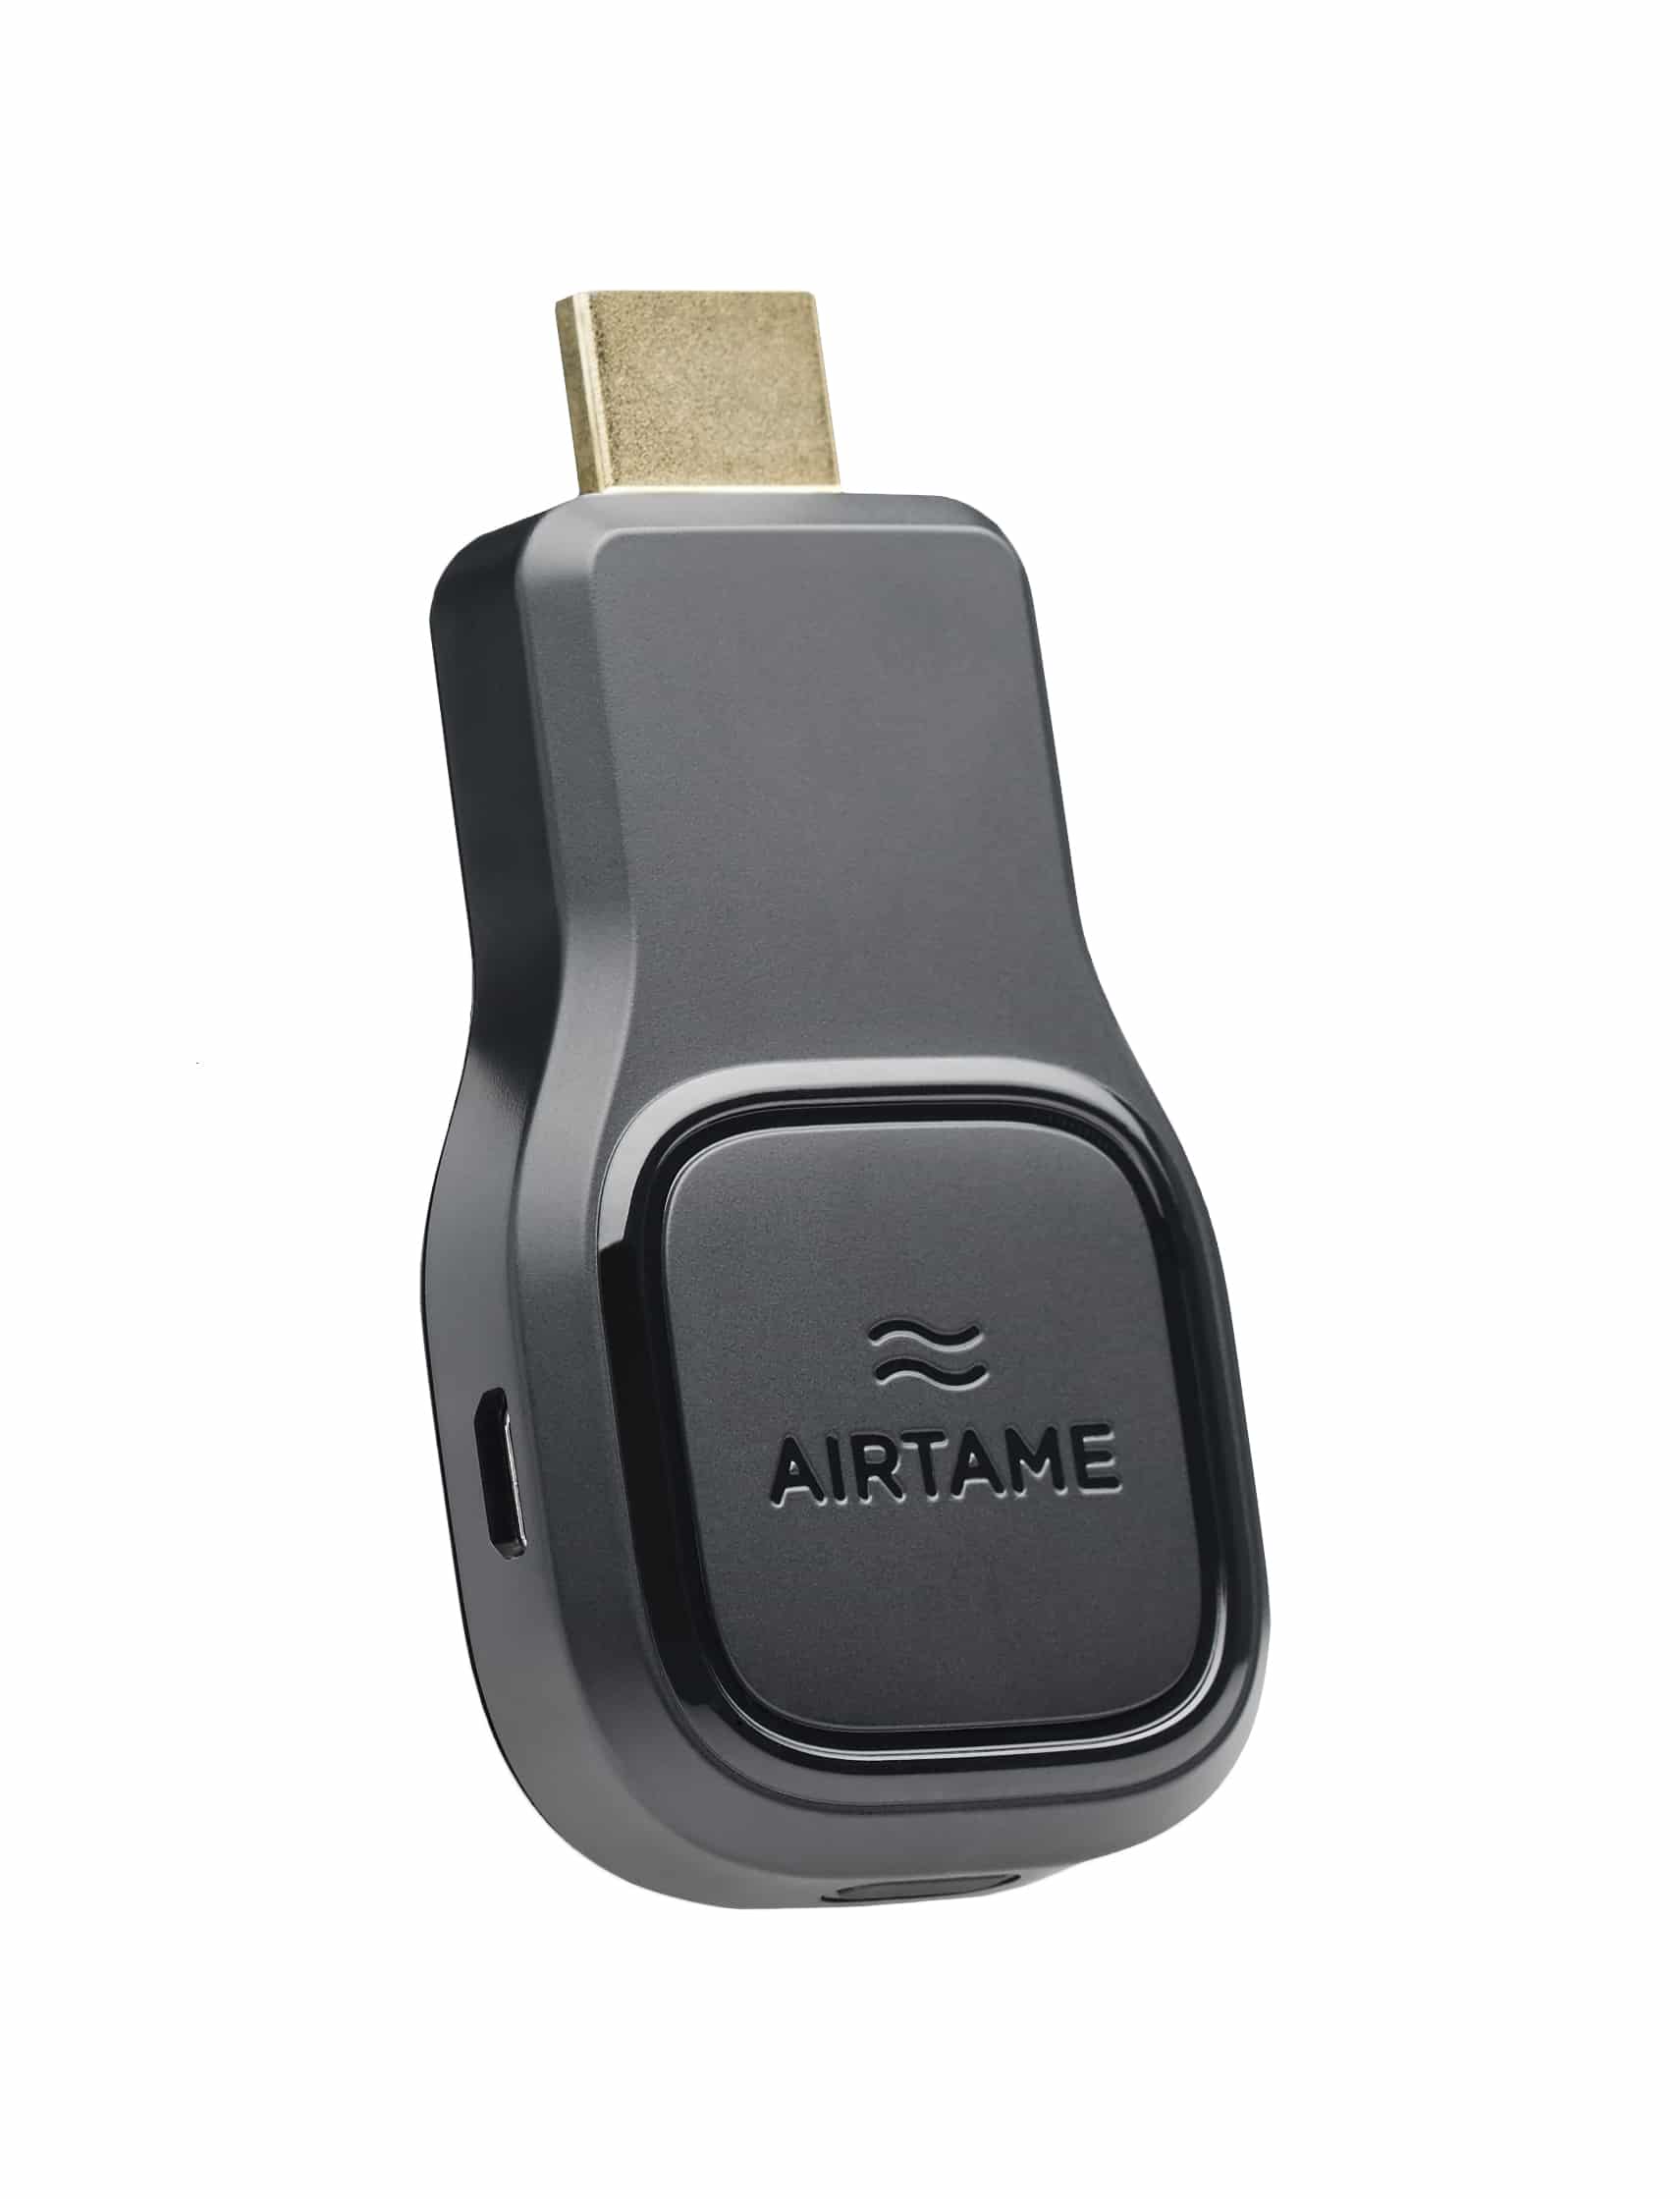 Airtame Device Wireless Displays Article Image